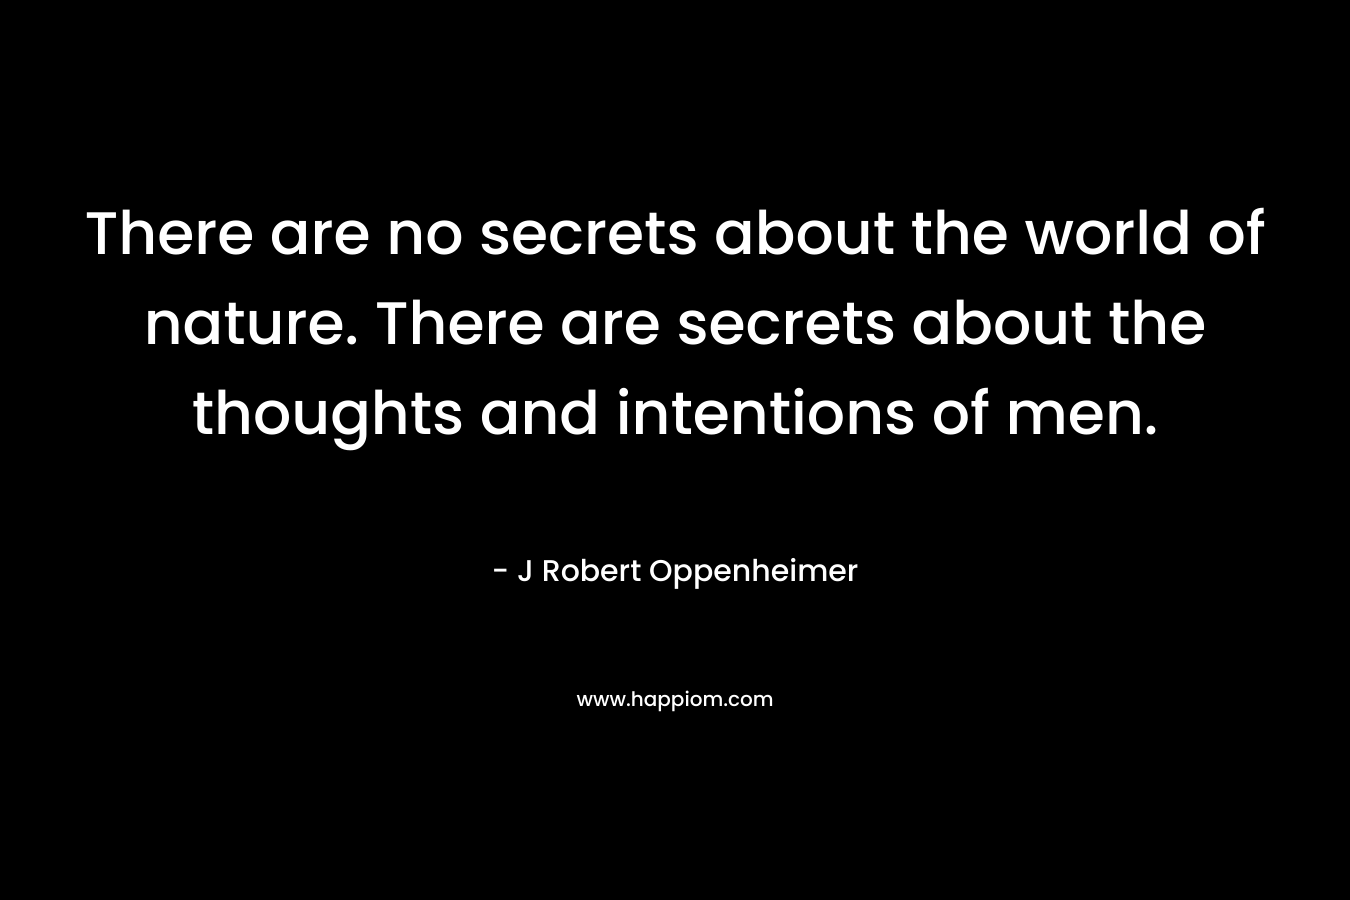 There are no secrets about the world of nature. There are secrets about the thoughts and intentions of men. – J Robert Oppenheimer